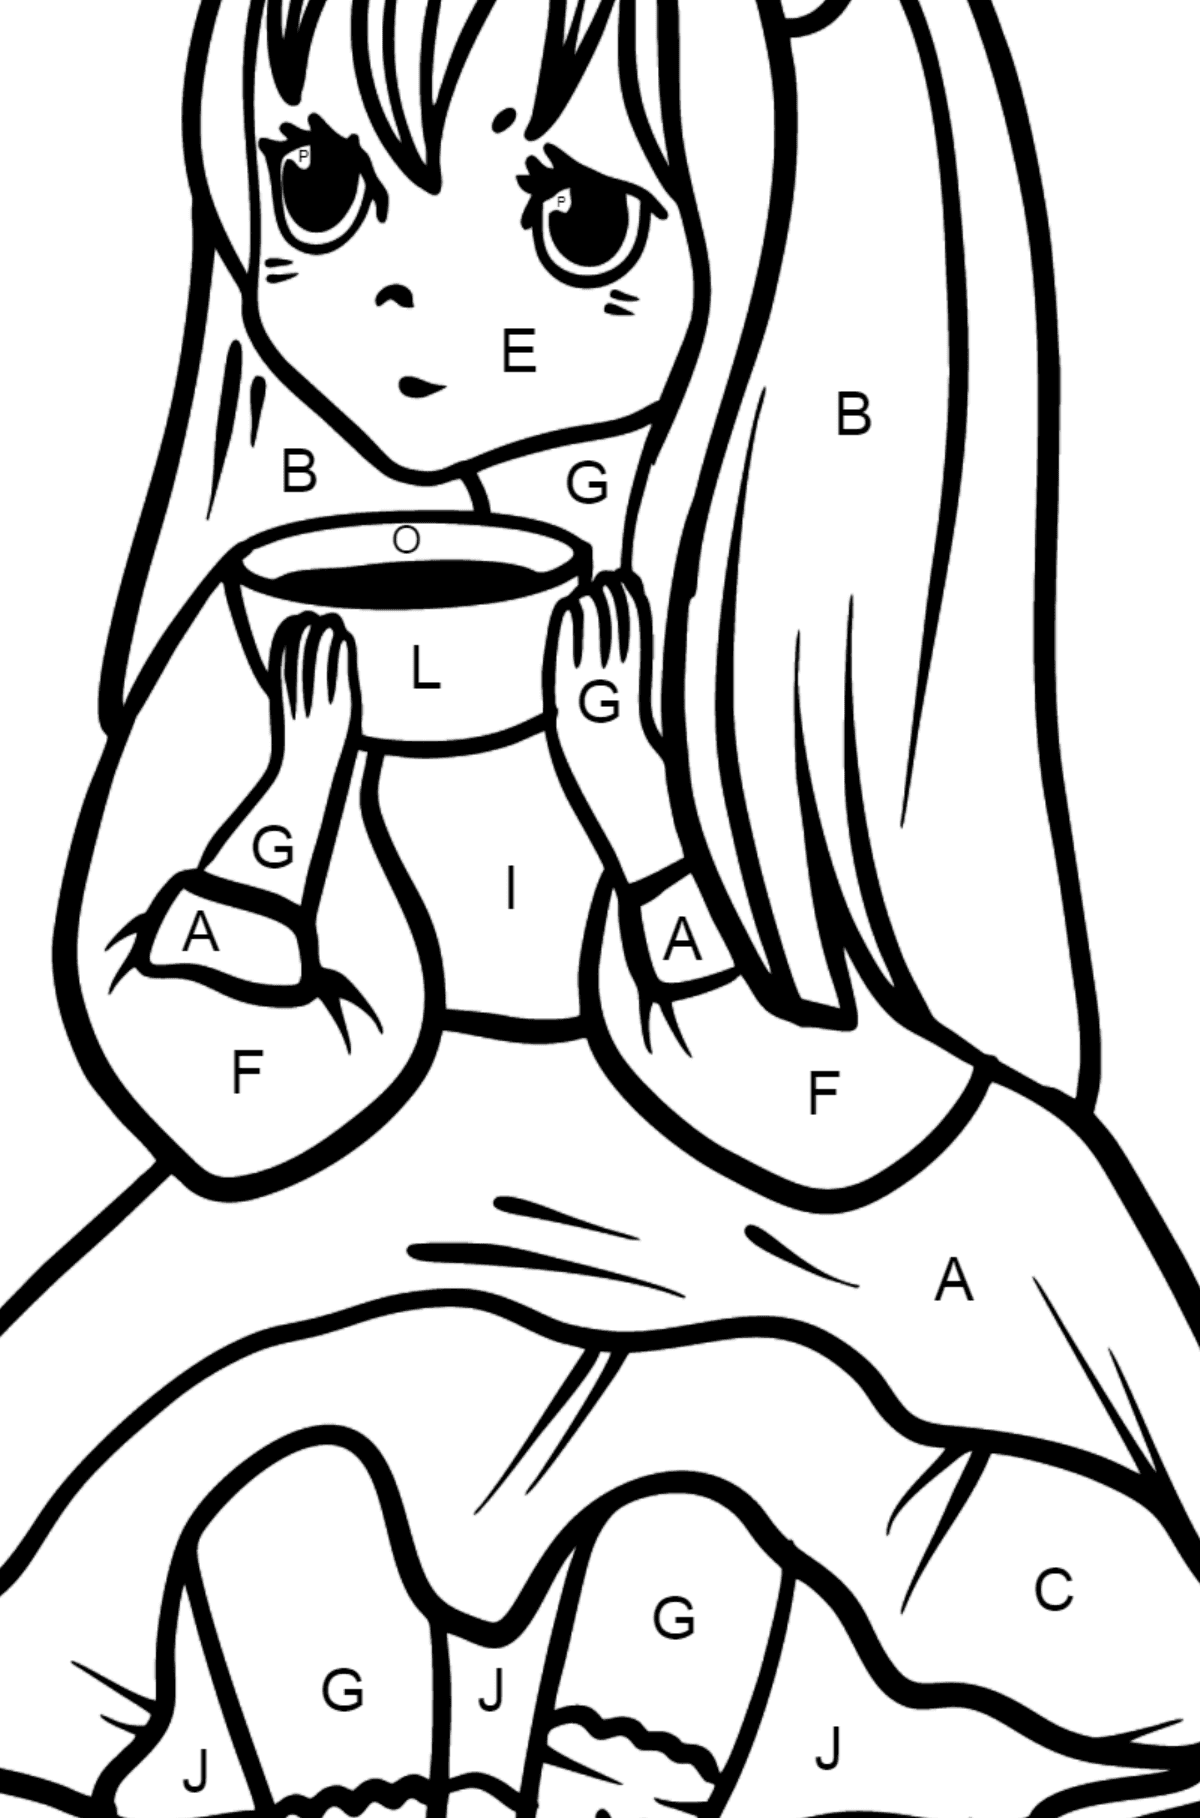 Anime Girl Drinking Coffee coloring page - Coloring by Letters for Kids